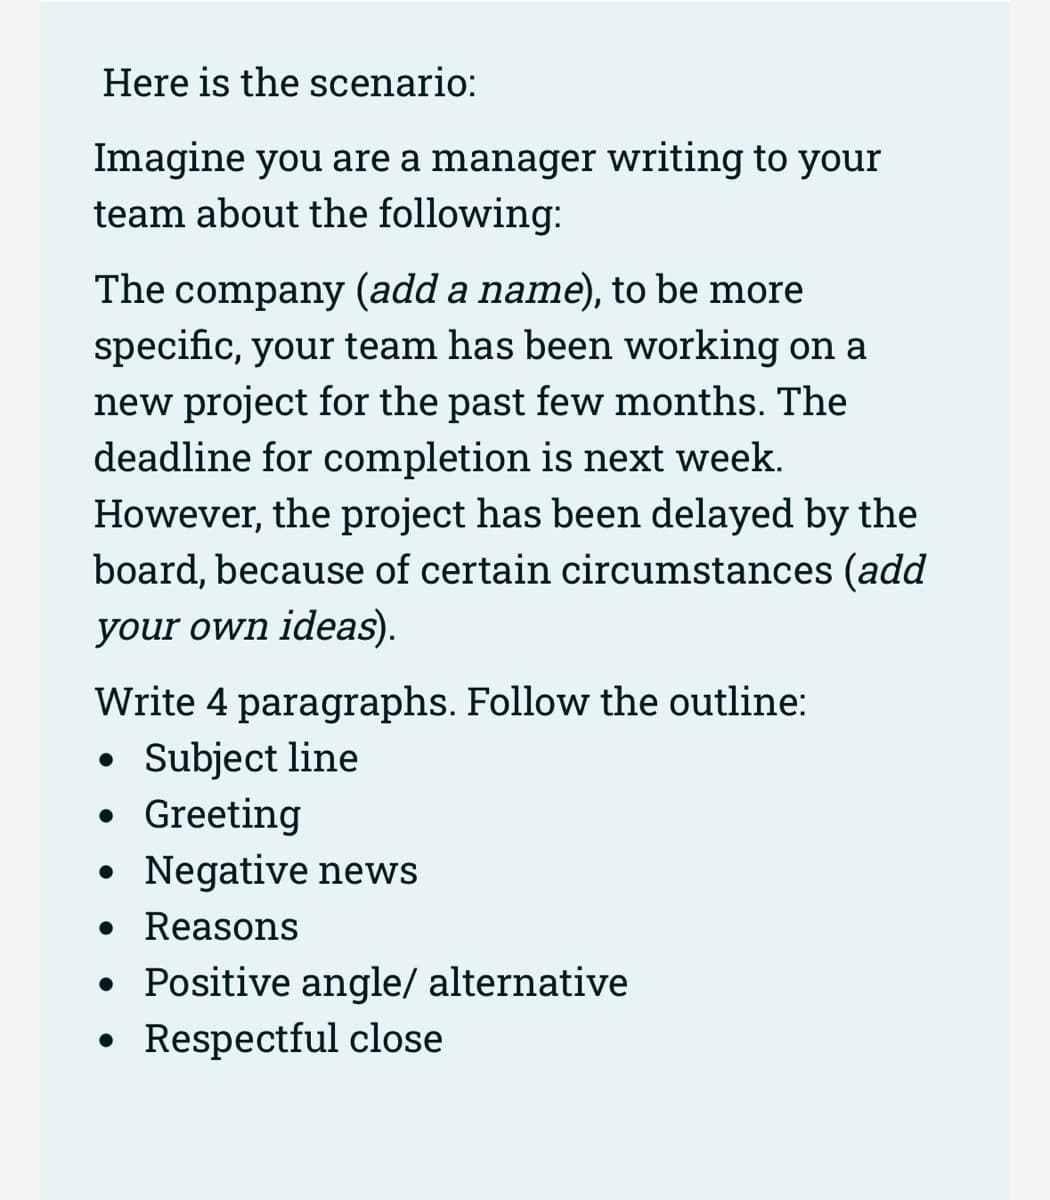 Here is the scenario:
Imagine you are a manager writing to your
team about the following:
The company (add a name), to be more
specific, your team has been working on a
new project for the past few months. The
deadline for completion is next week.
However, the project has been delayed by the
board, because of certain circumstances (add
your own ideas).
Write 4 paragraphs. Follow the outline:
• Subject line
Greeting
Negative news
●
●
• Reasons
• Positive angle/ alternative
• Respectful close